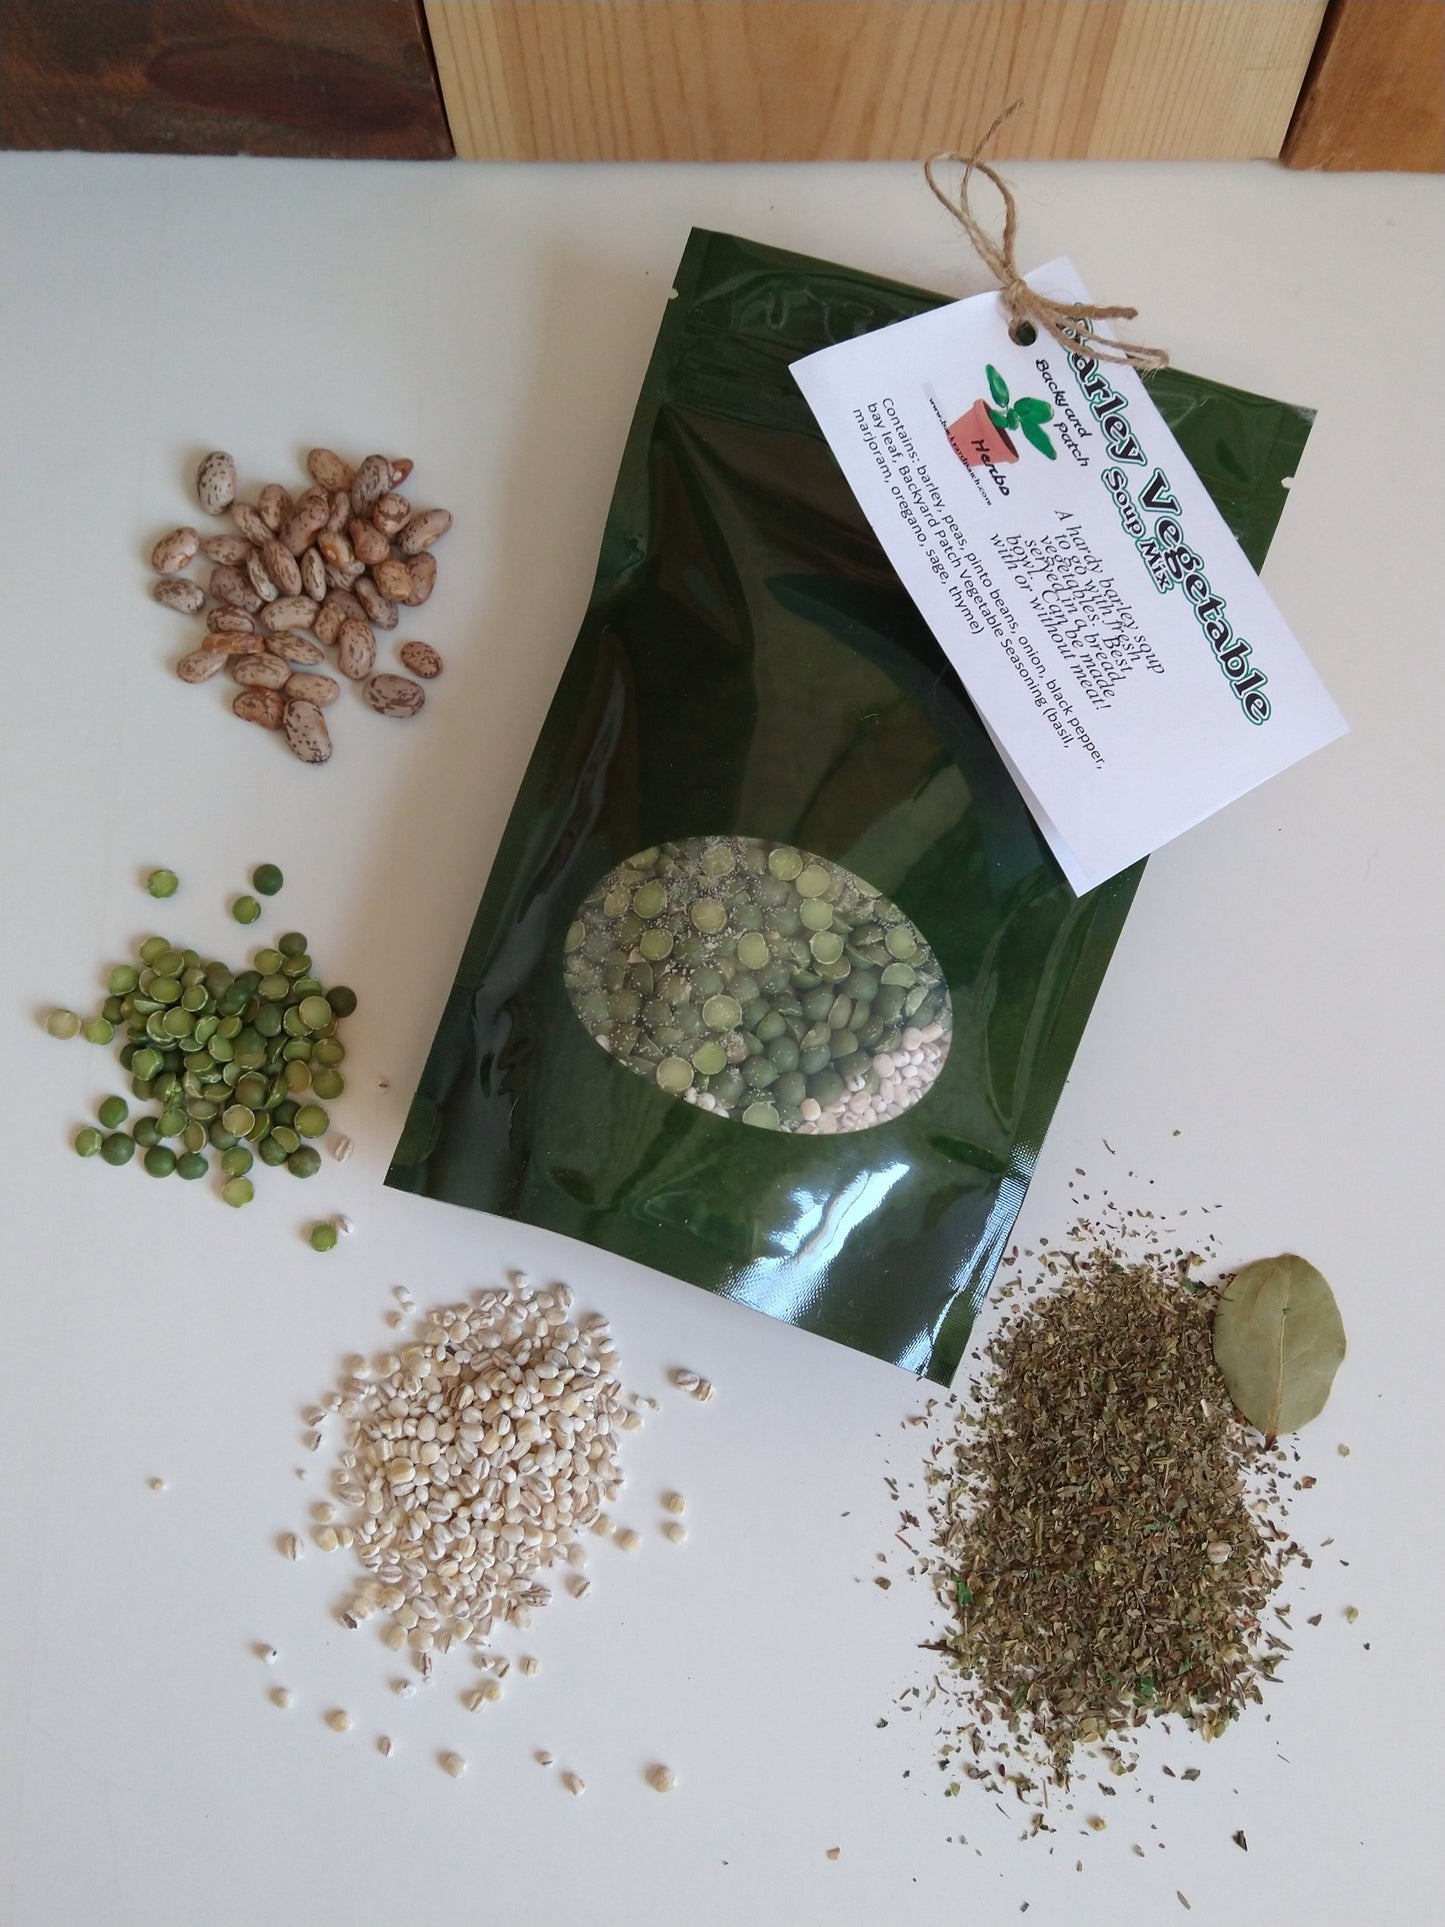 Barley Vegetable Soup Mix, Gourmet dry vegan soup mix, hand-blended, clean food, dry soup mix